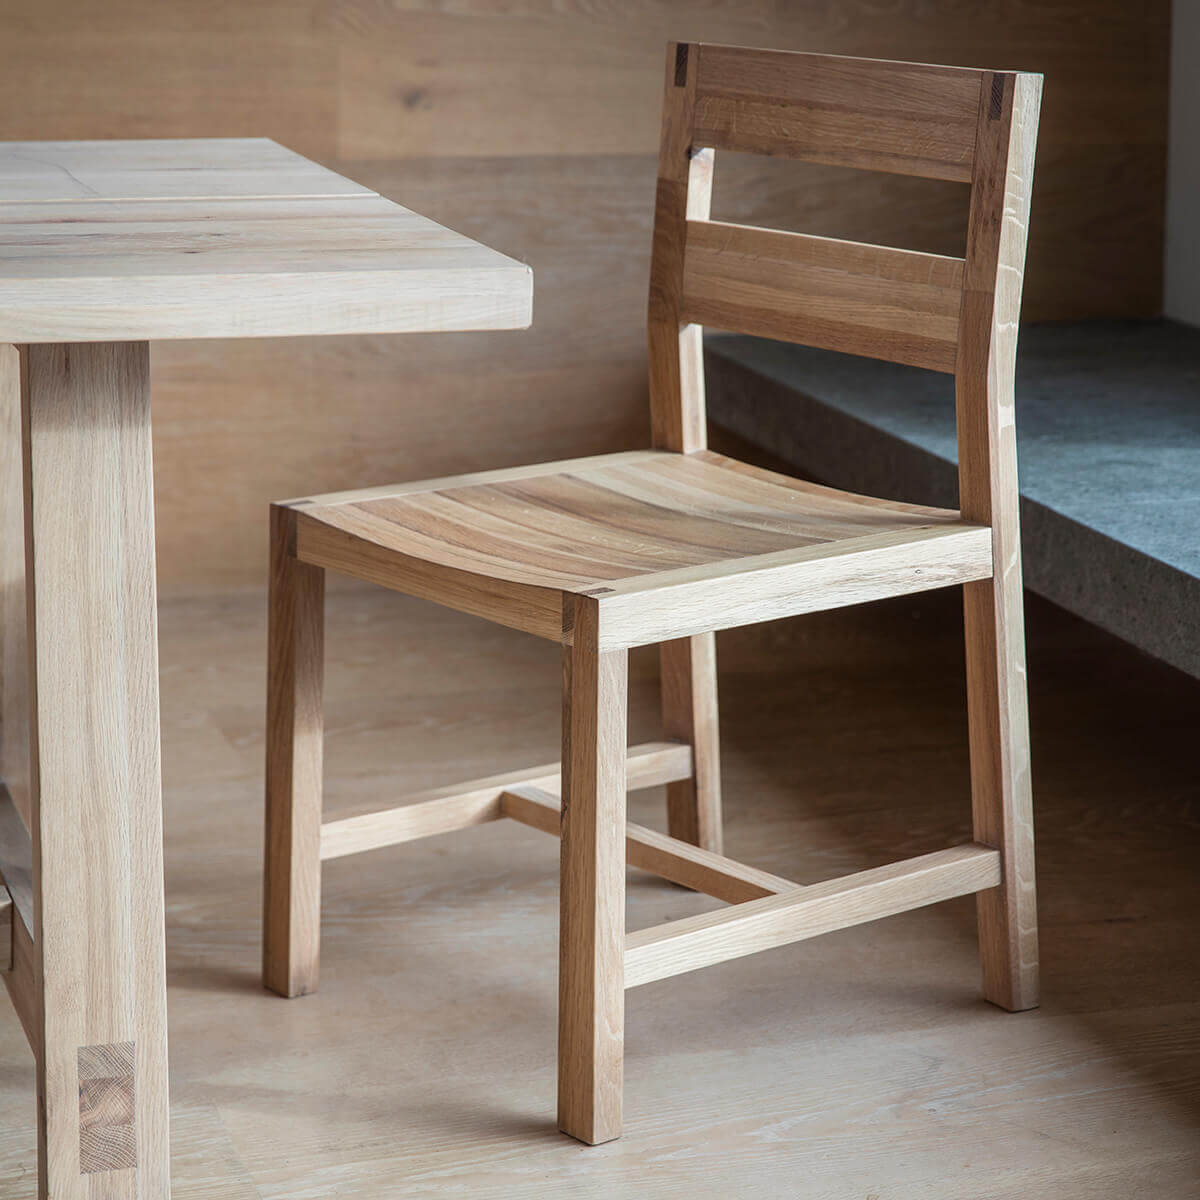 Dining room chairs made of oak narrative dining room set made of solid oak 2 XGTDVWH